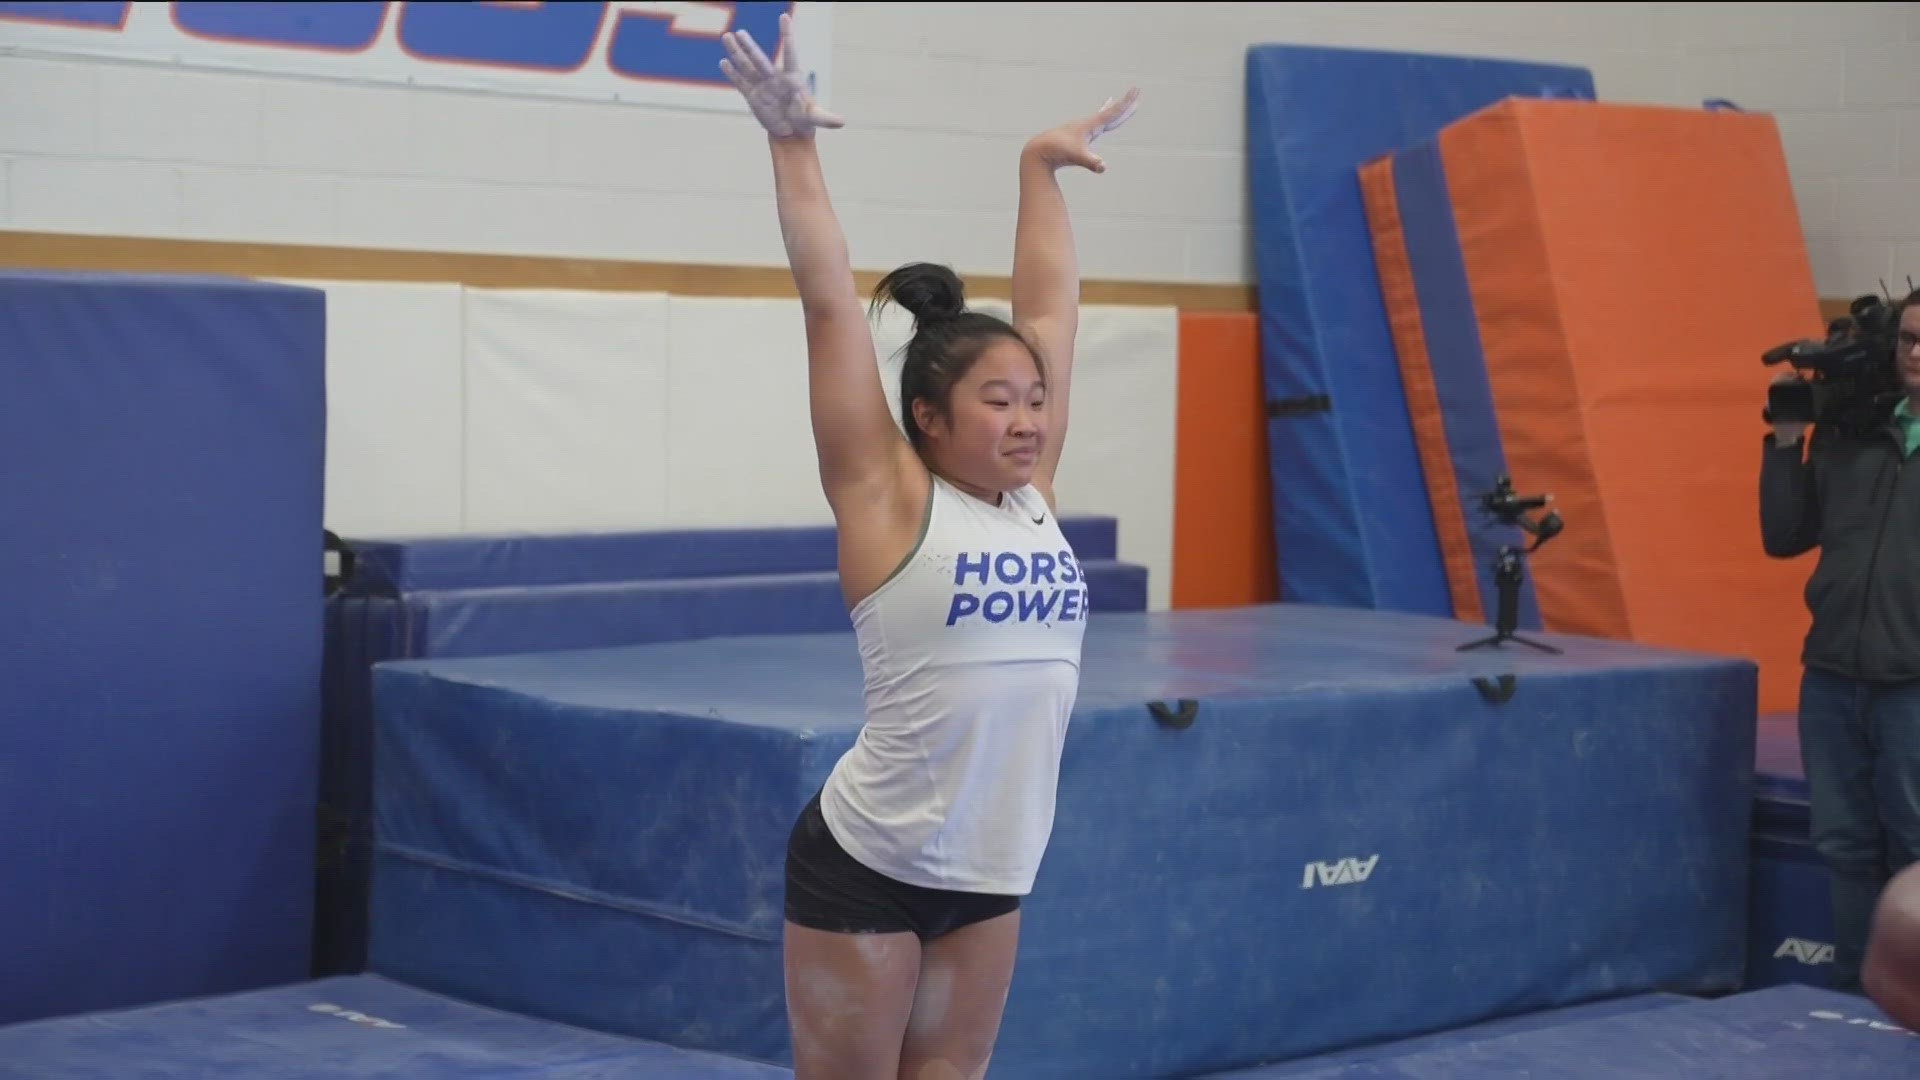 Boise State faces off with conference-foe BYU at 3 p.m. MT Wednesday in the NCAA Regional Championships in Los Angeles. KTVB caught up with the Broncos this week.